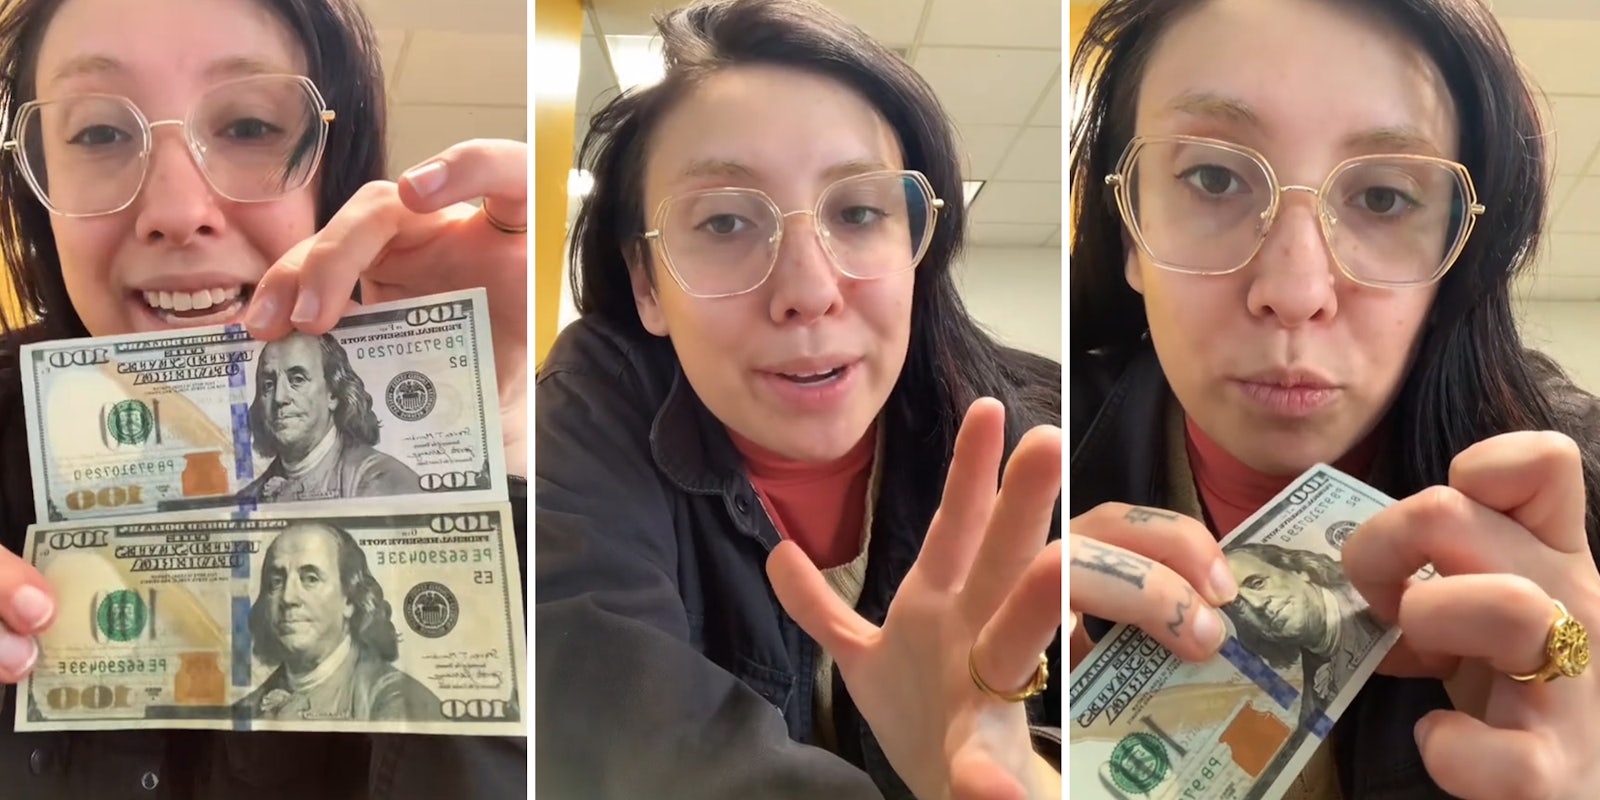 Bank worker shows how to spot a counterfeit bill after customer tries paying with fake $100